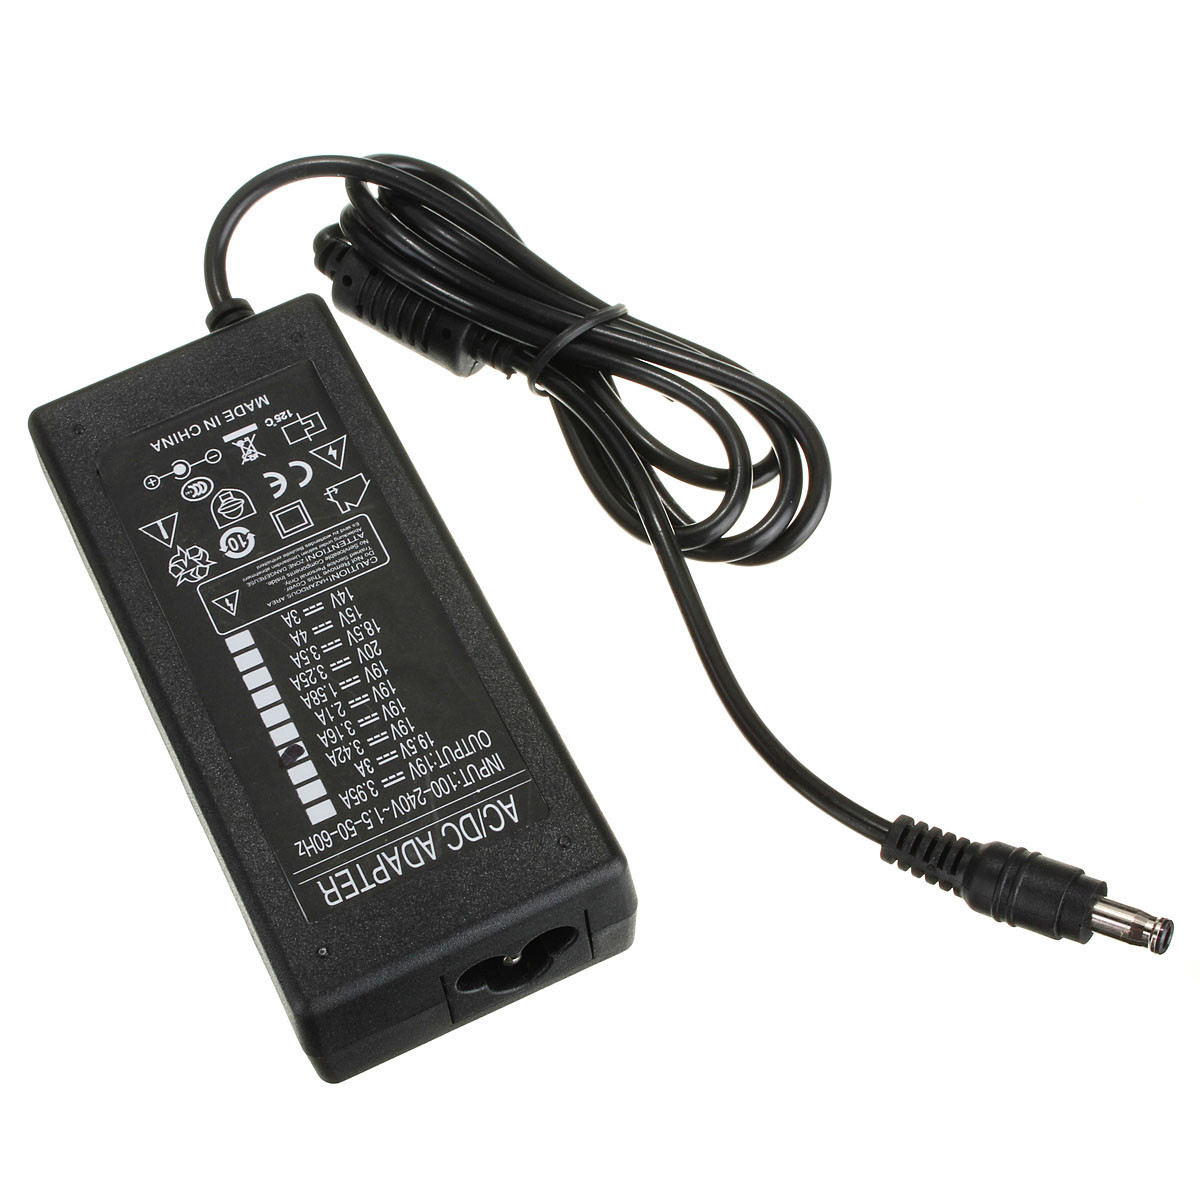 19V 3.16A 60W AC Power Adapter for Laptop SAMUNG CPA09-004A